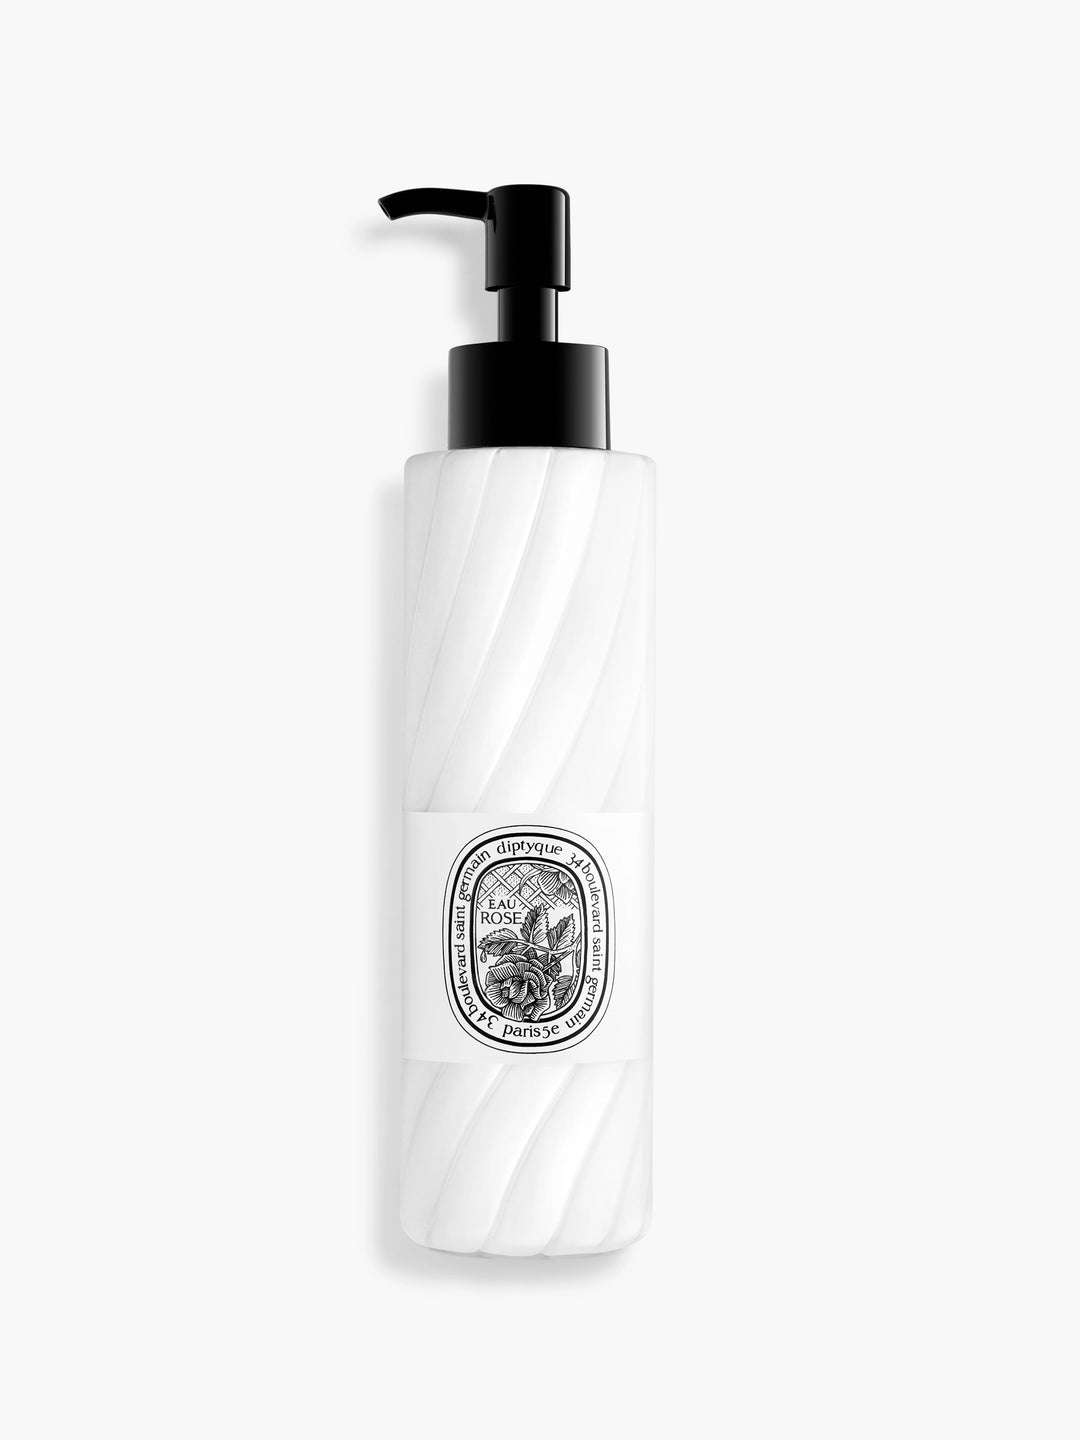 Diptyque- Hand and Body Lotion in Eau Rose